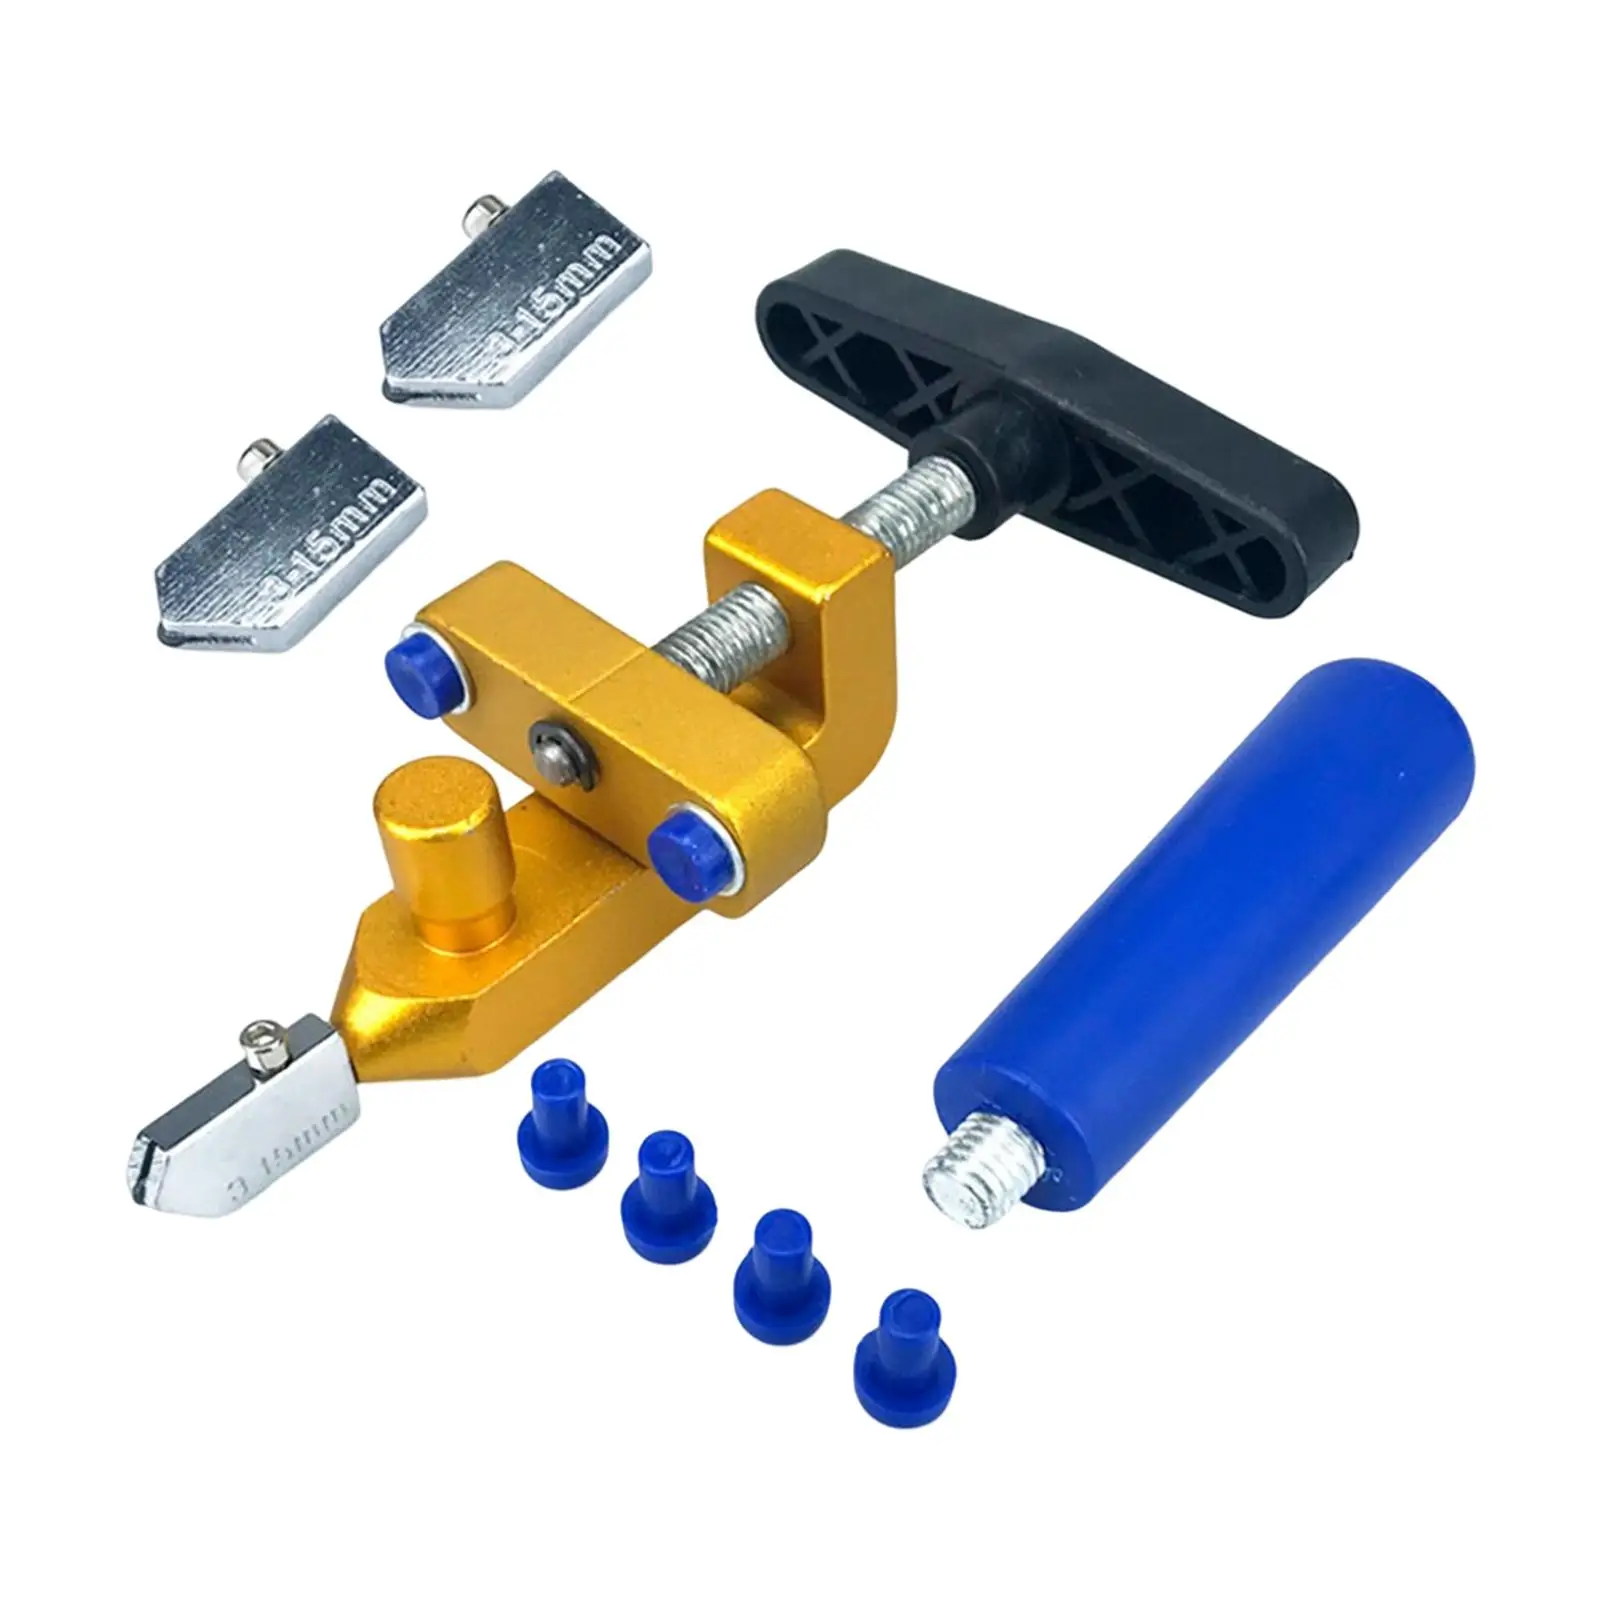 Manual Glass Cutter Portable Hand Tools, Lightweight Ceramic Tile Opener for Home DIY